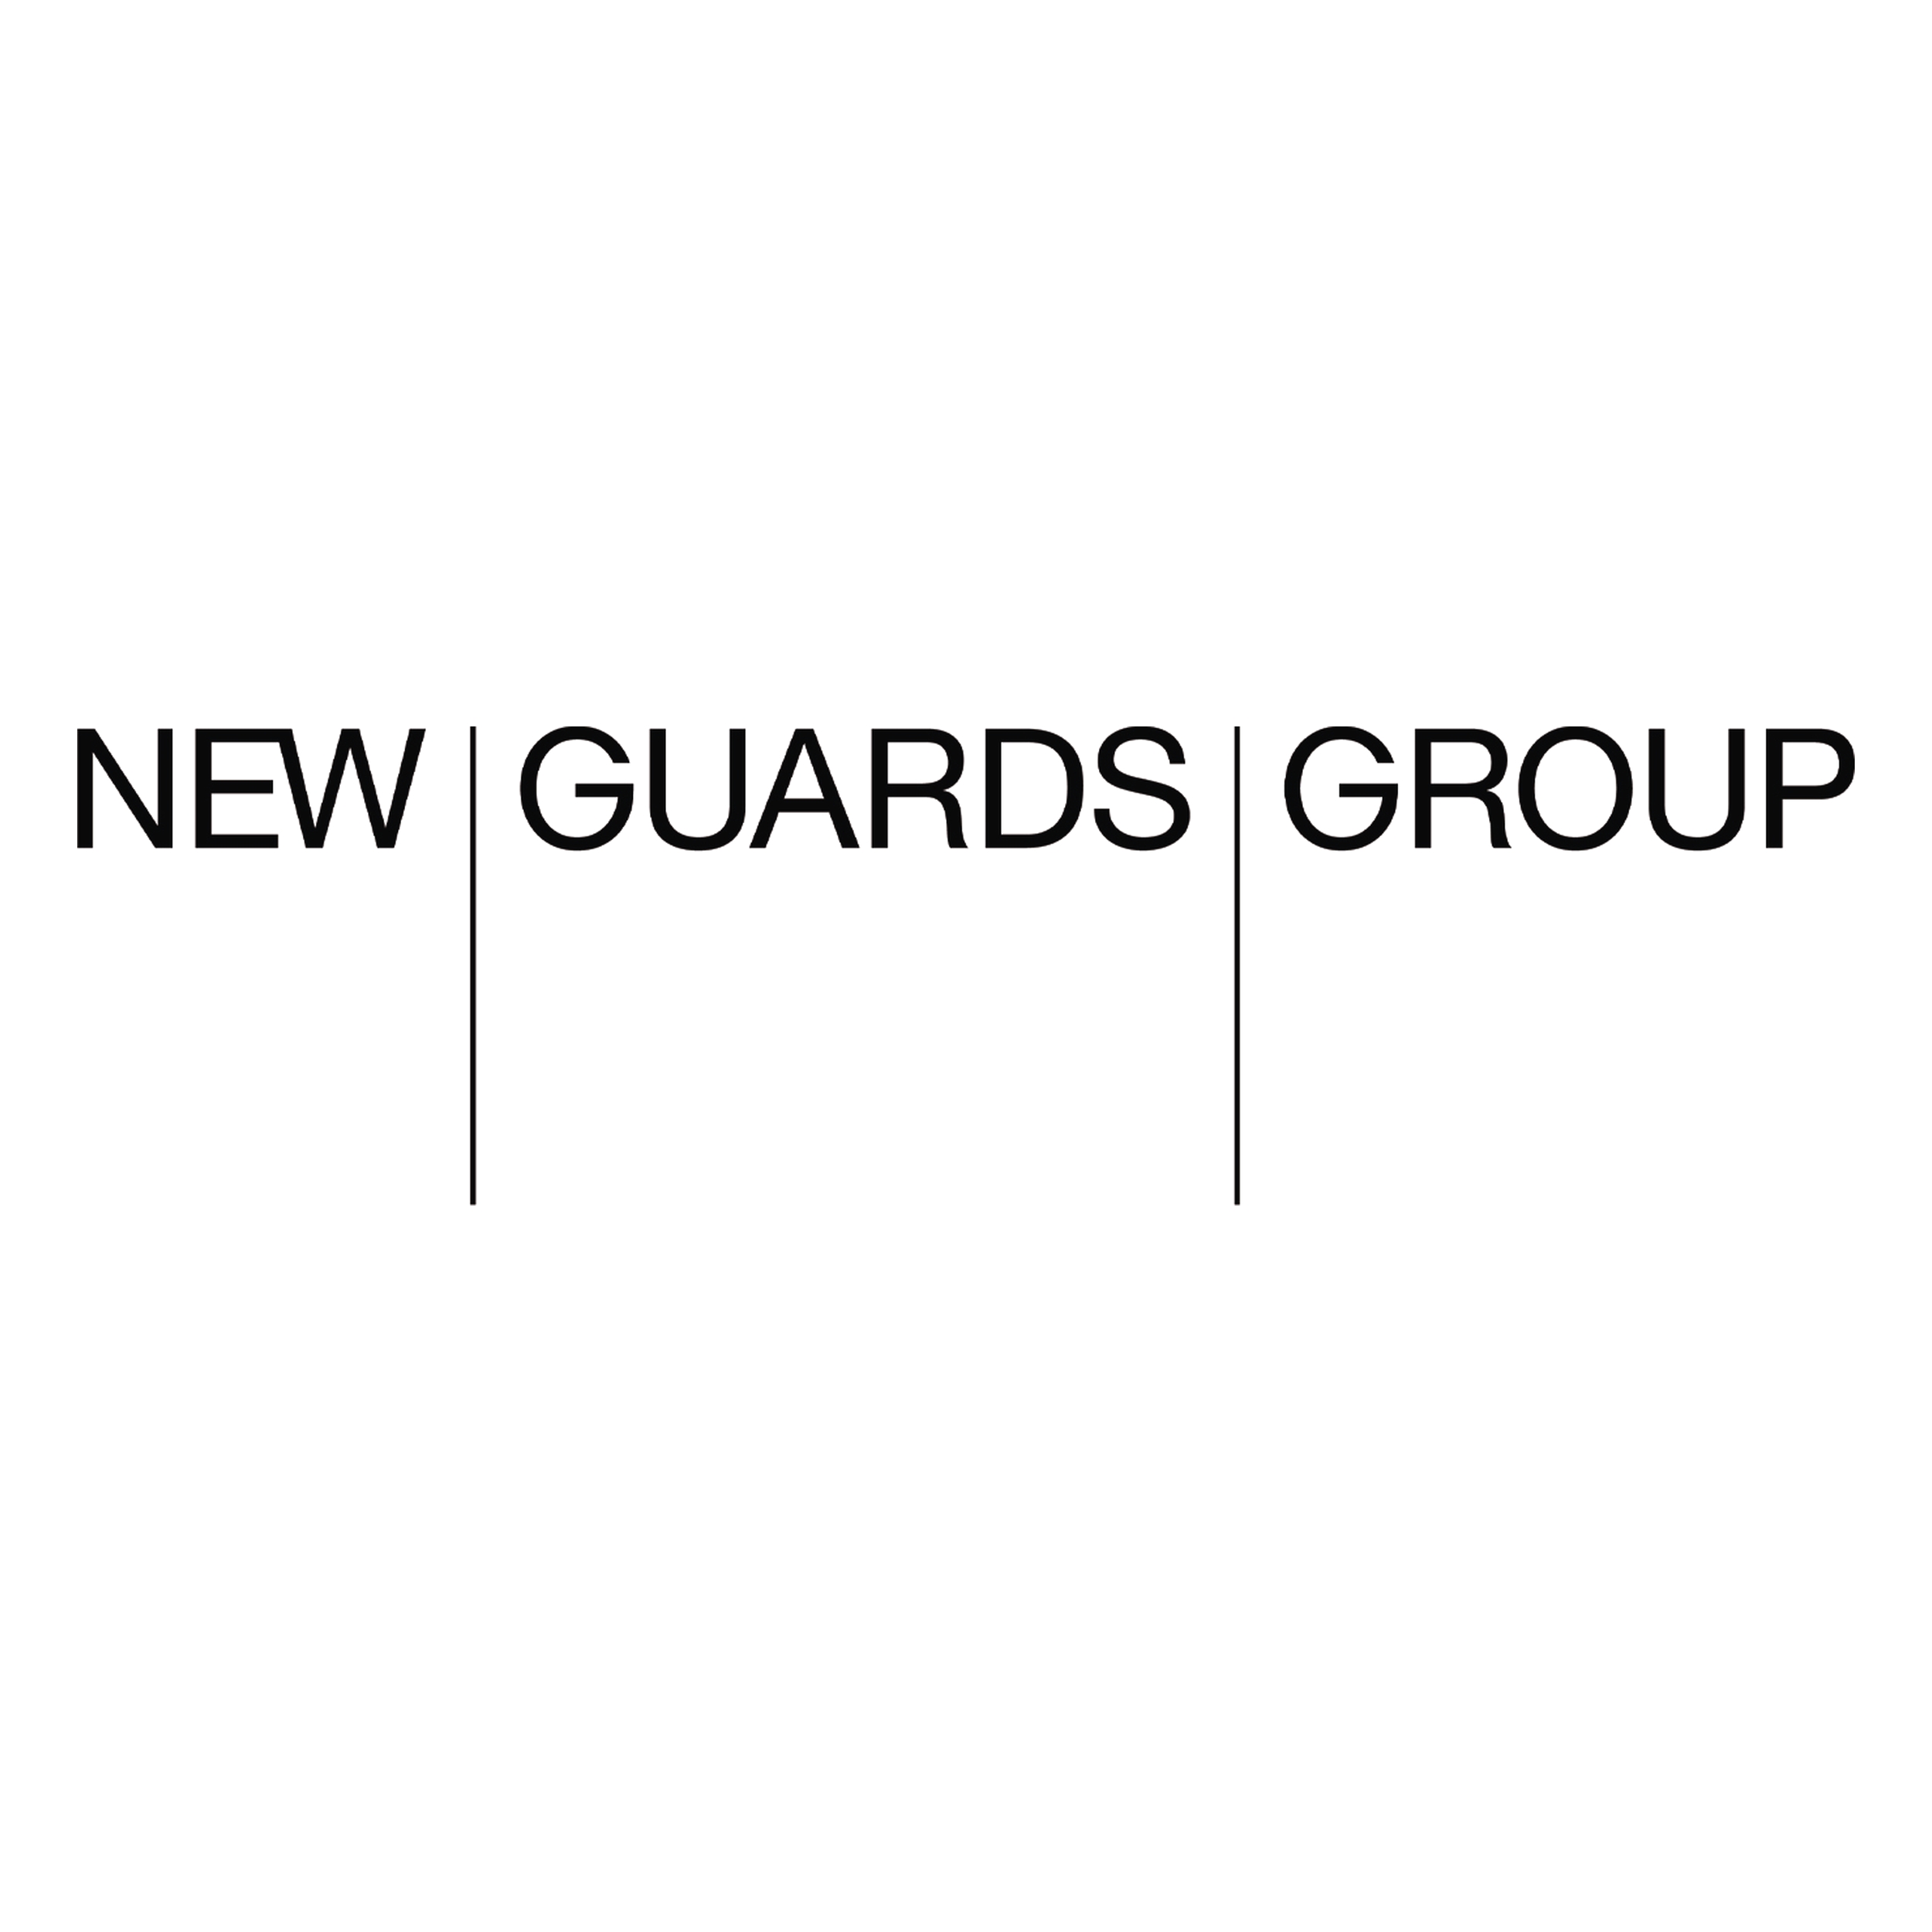 NEW GUARDS GROUP